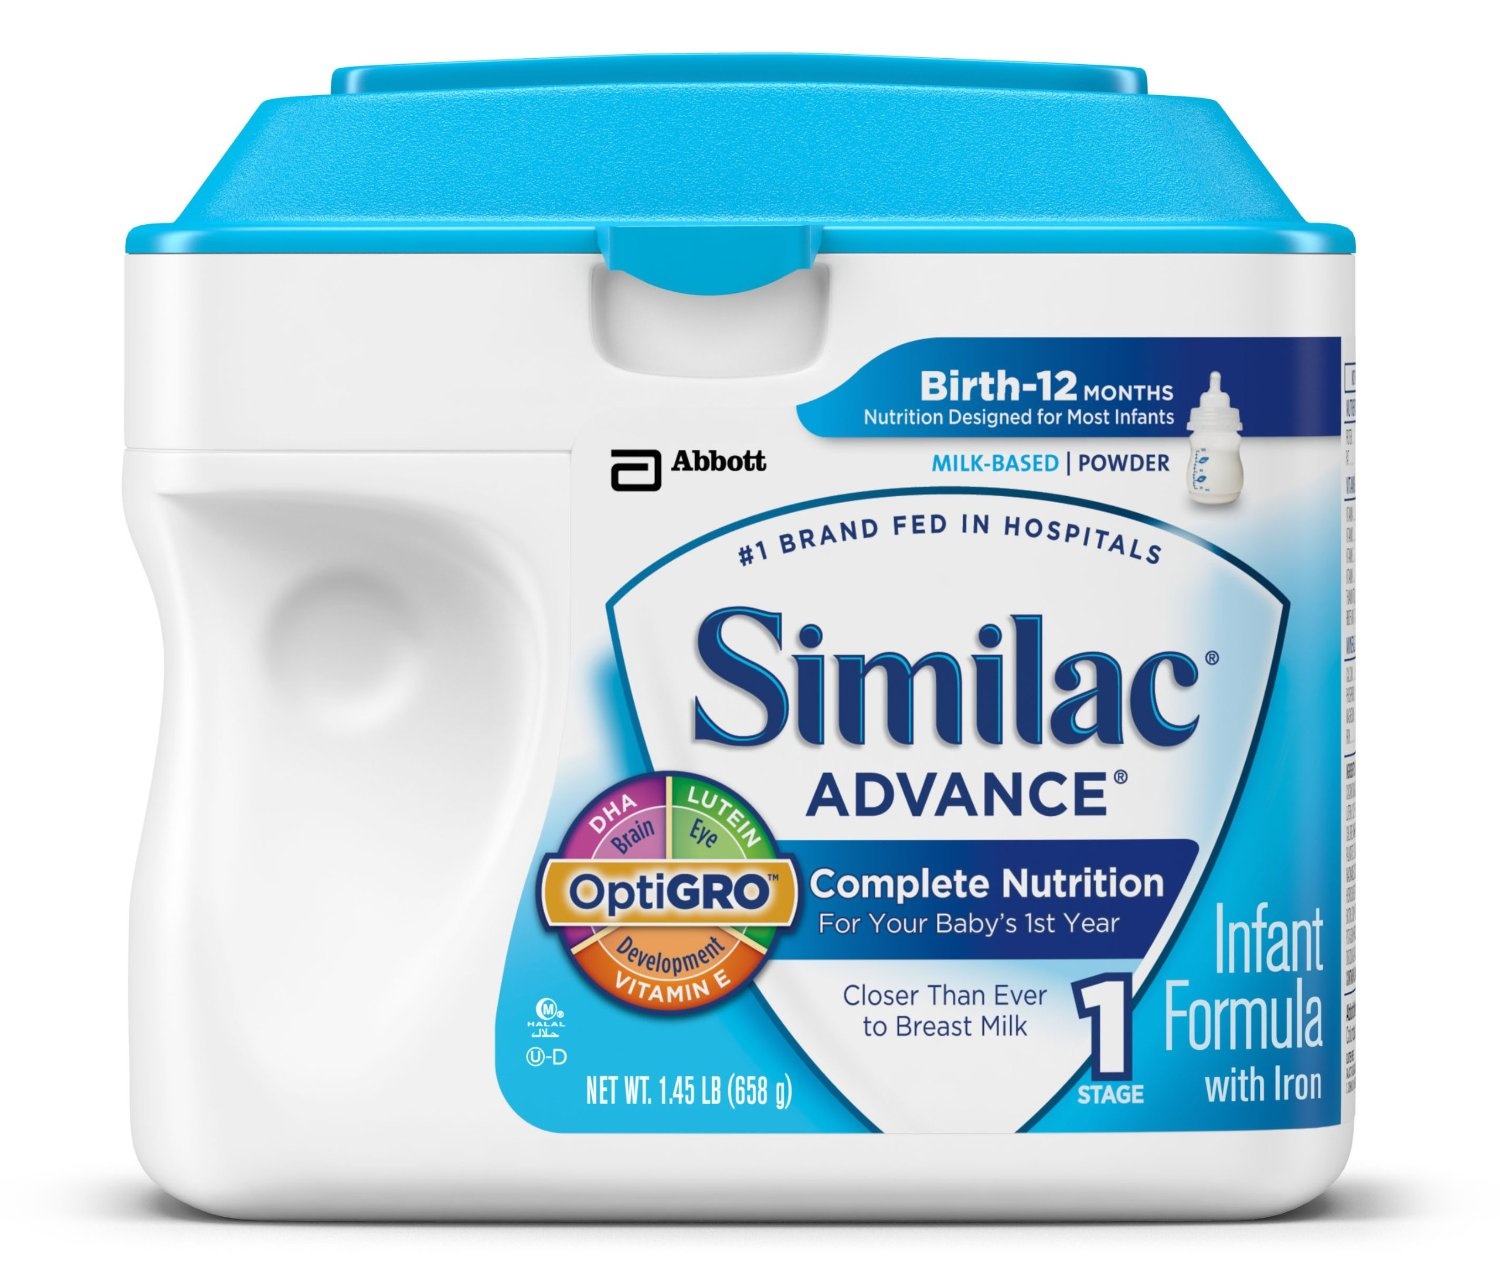 How To Get Coupons For Similac Baby Formula / Wcco Dining Out Deals - Free Printable Similac Baby Formula Coupons